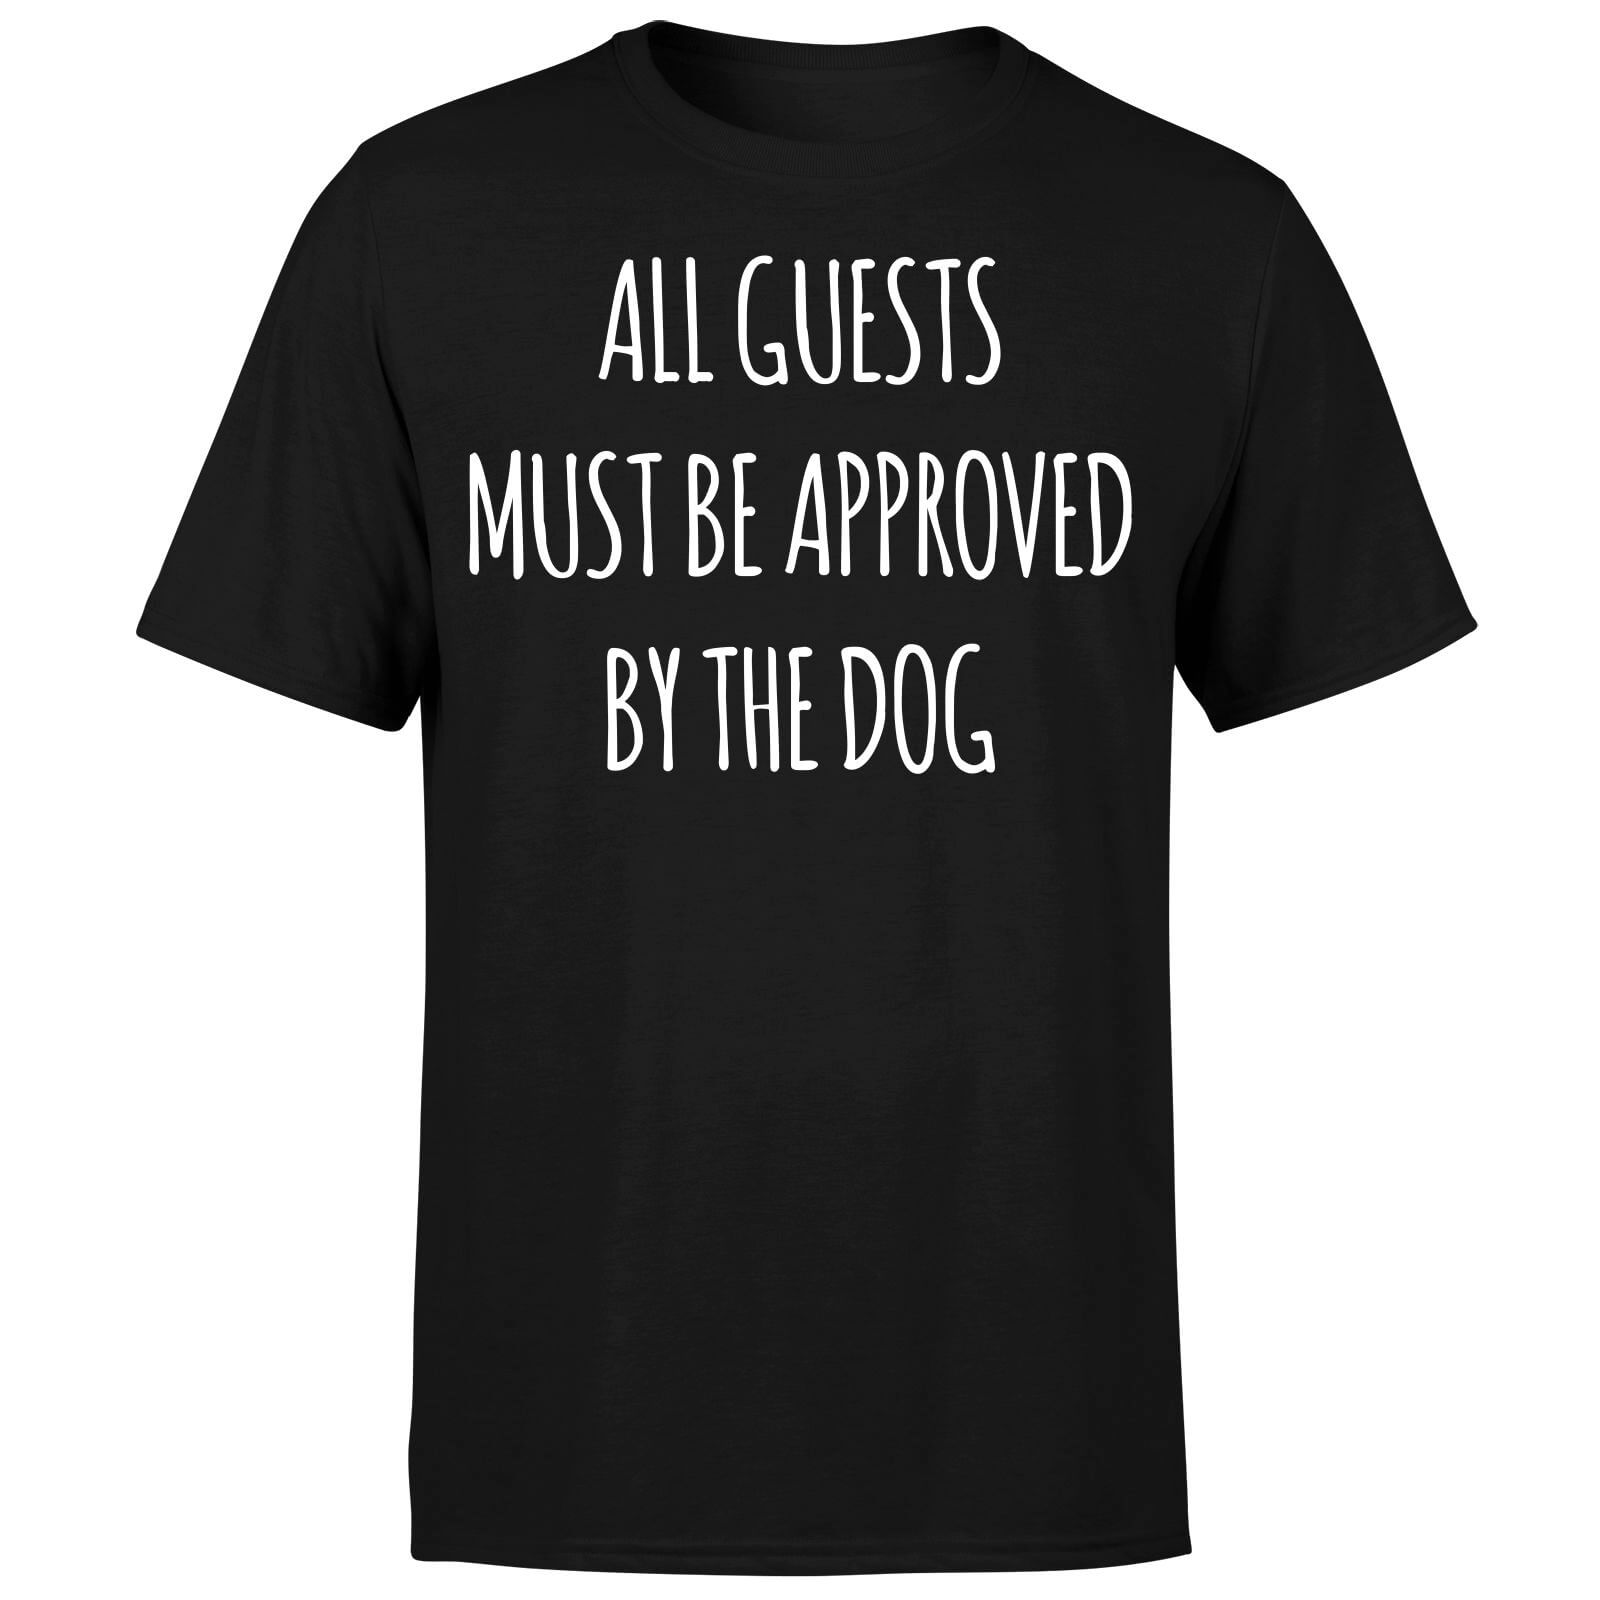 All Guests Must Be Approved By The Dog T-Shirt - Black - S - Black